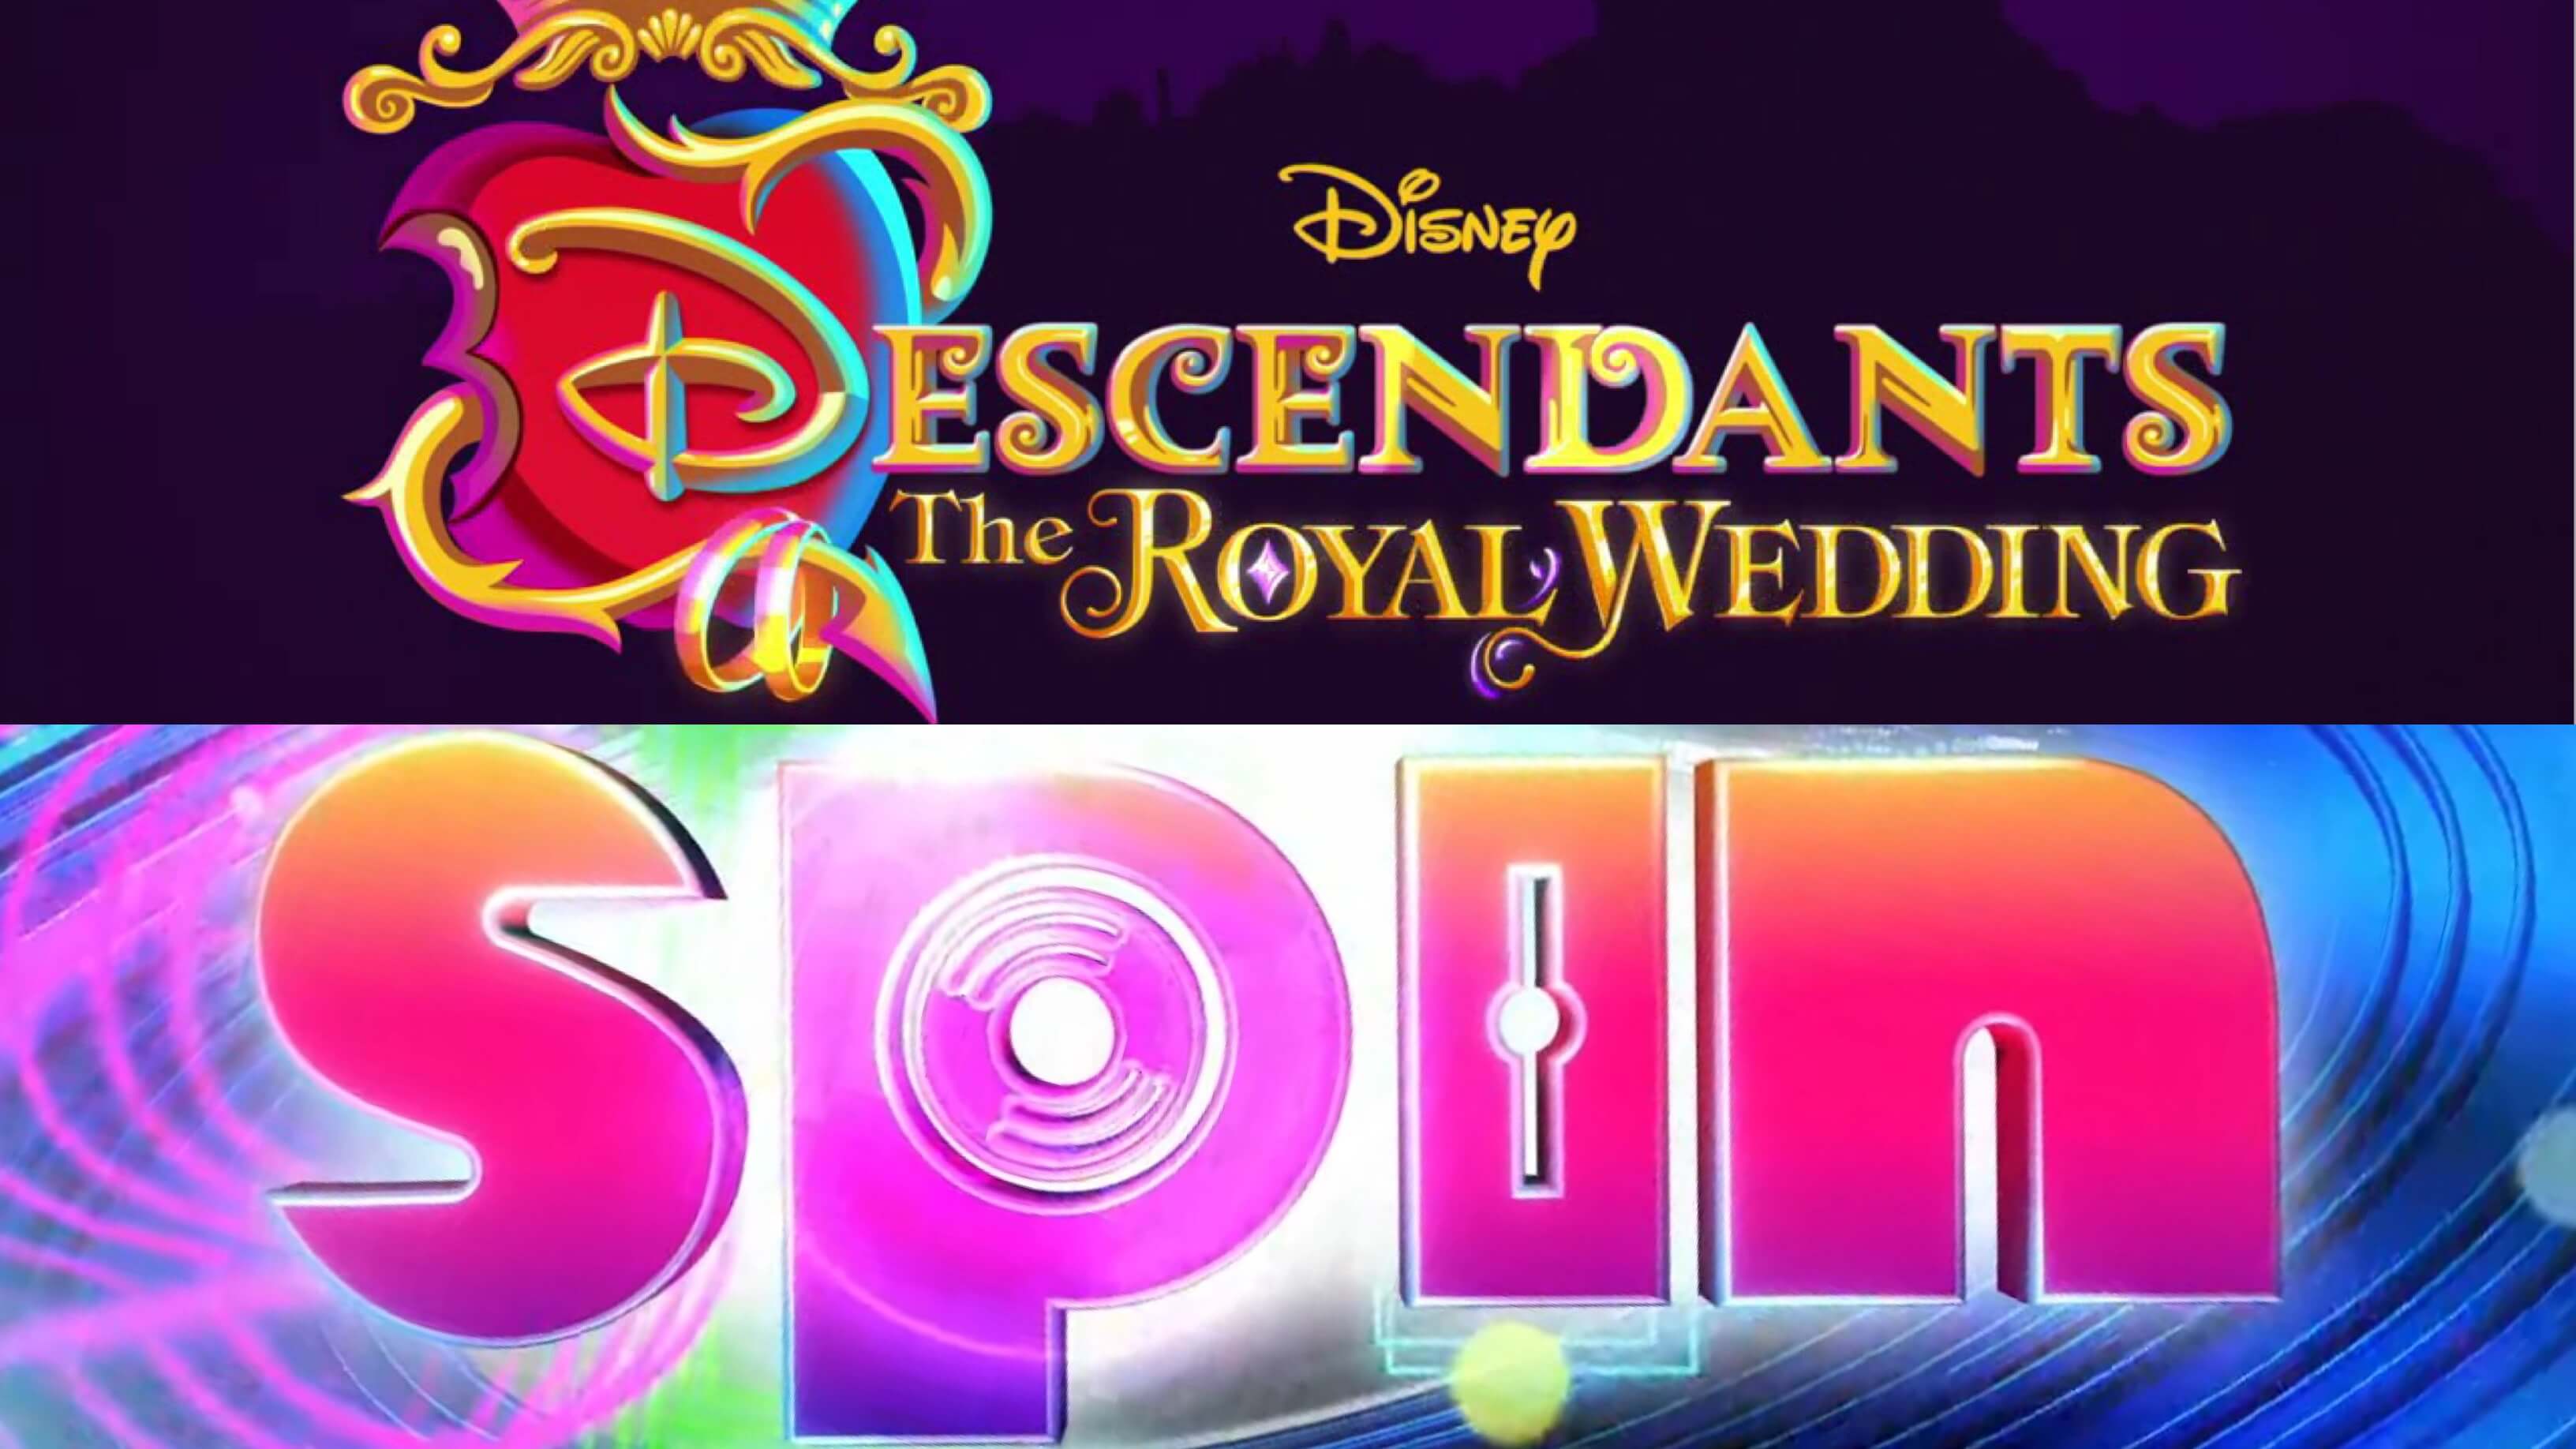 Disney Channel Sets ‘Descendants: The Royal Wedding’ and DCOM ‘Spin’ For August